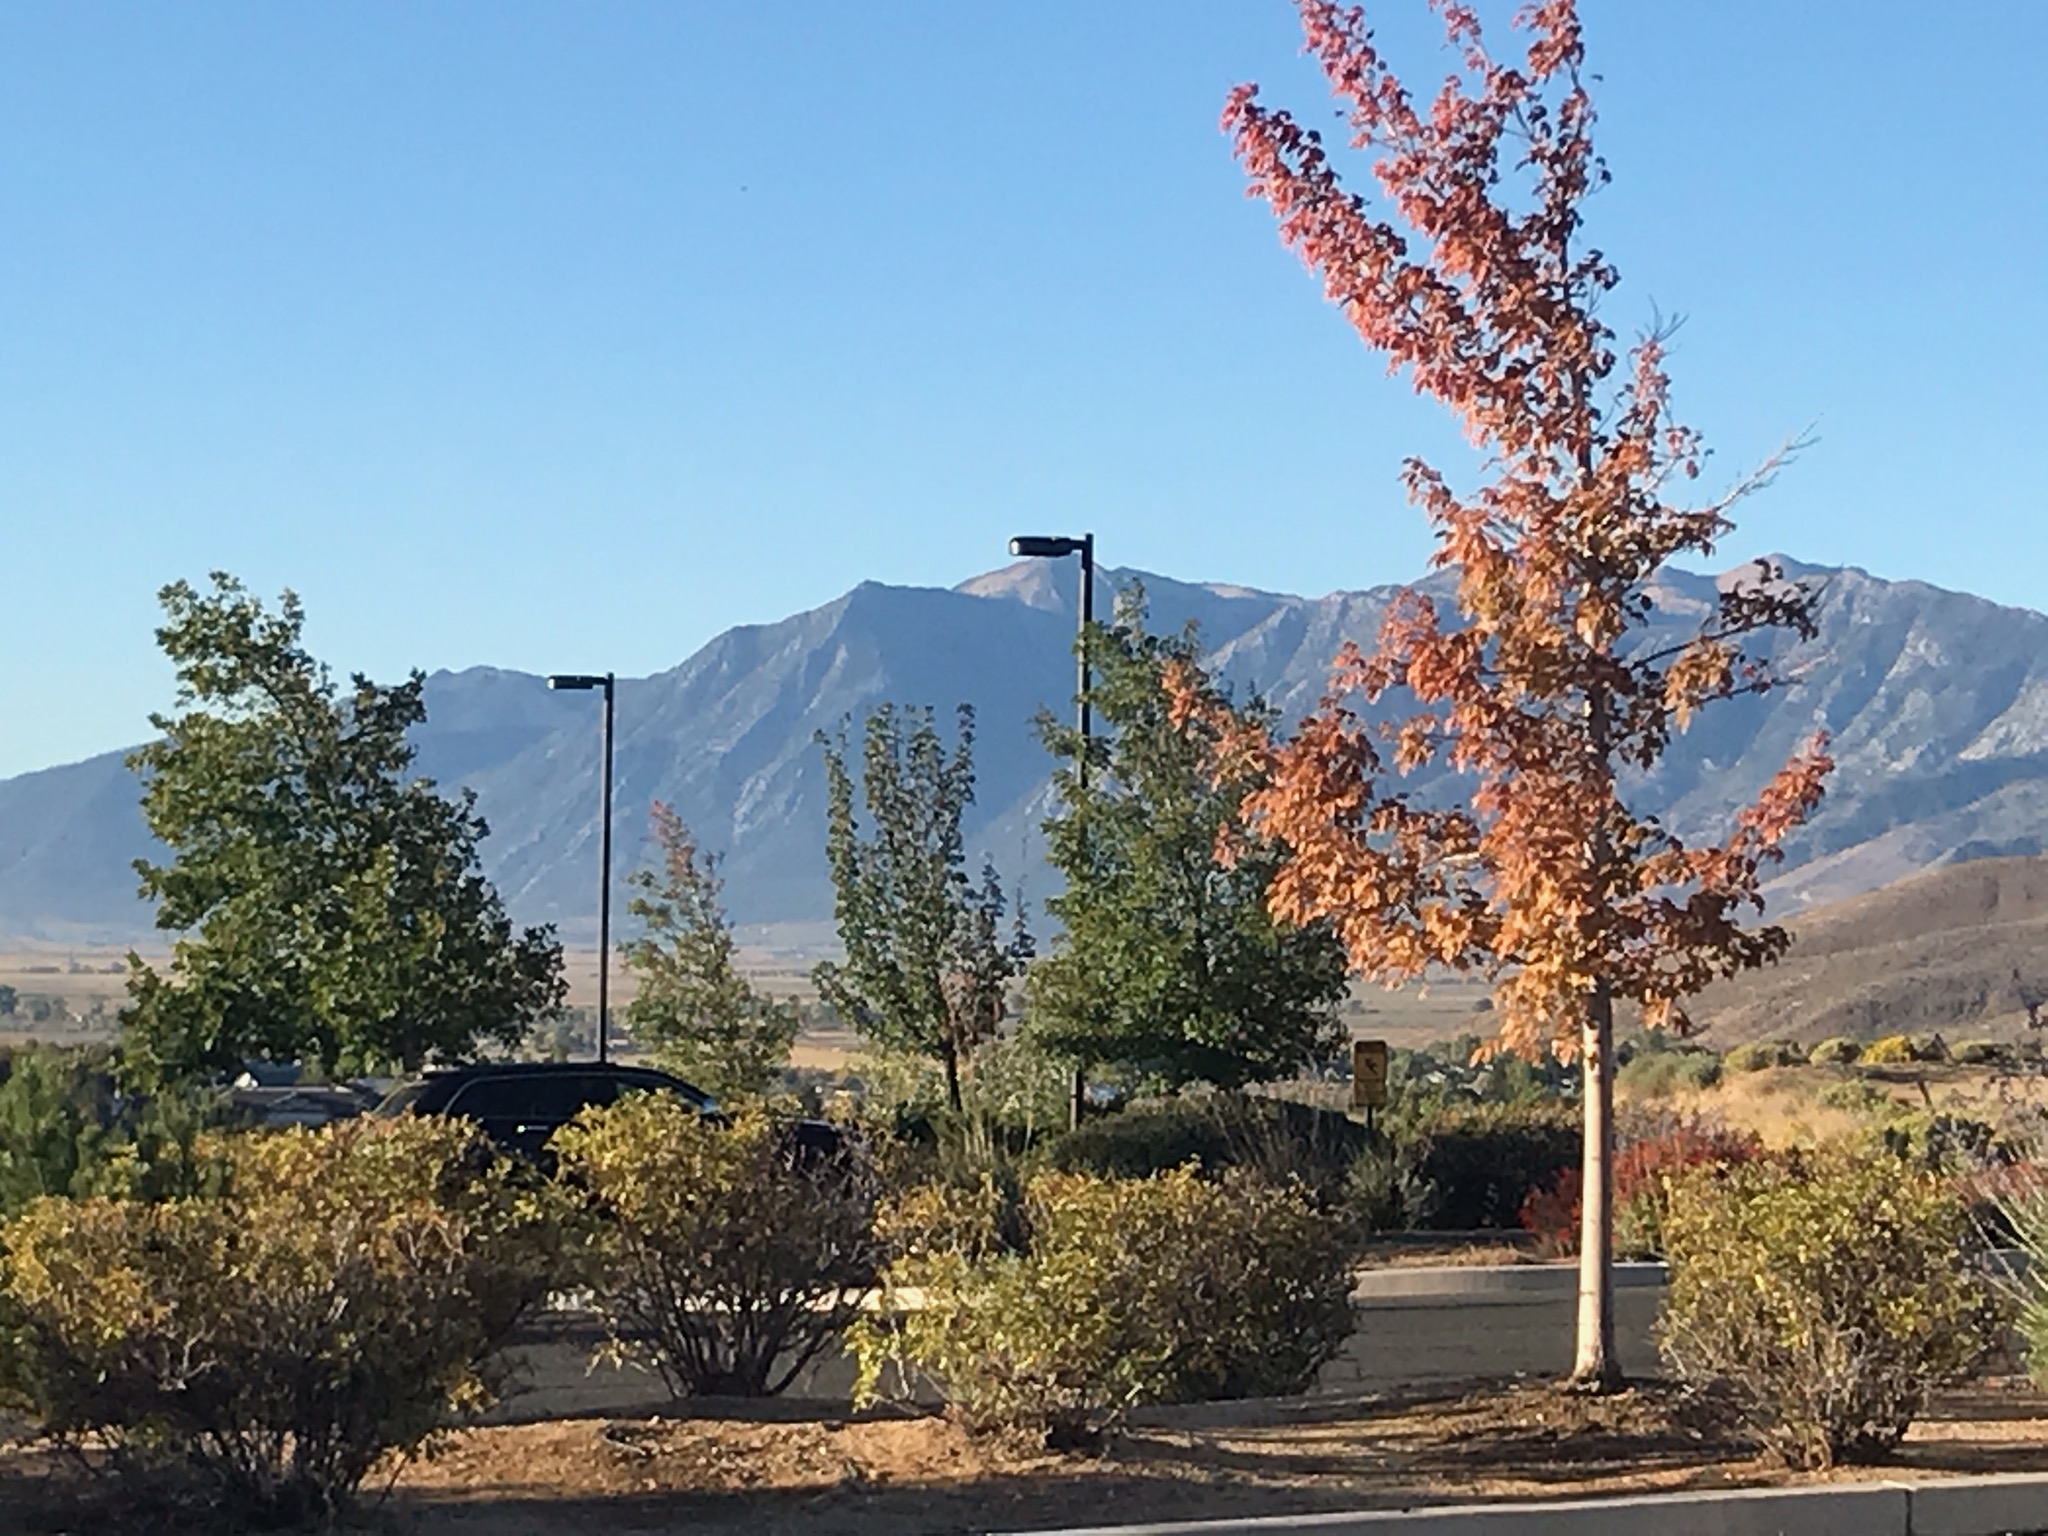 View of the Sierra's from the Sierra Lutheran High School campus on a clear day